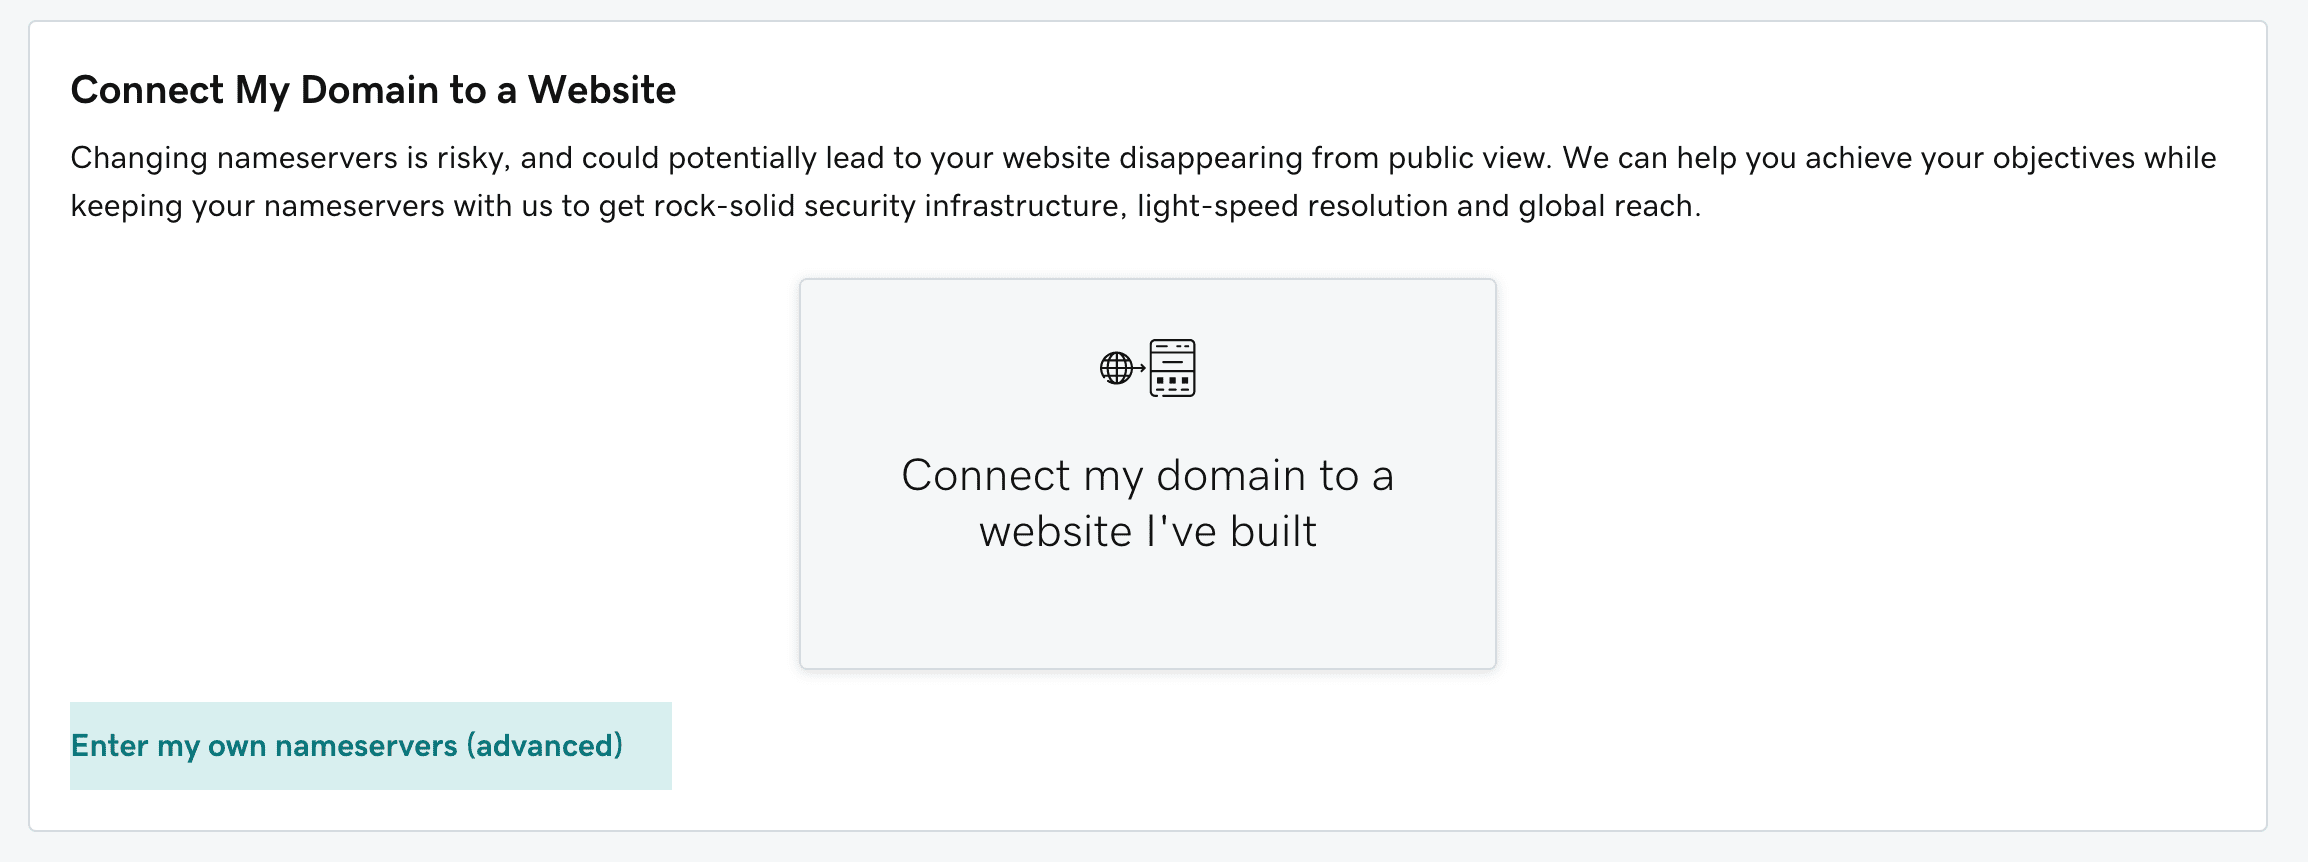 Connect my domain to a website.